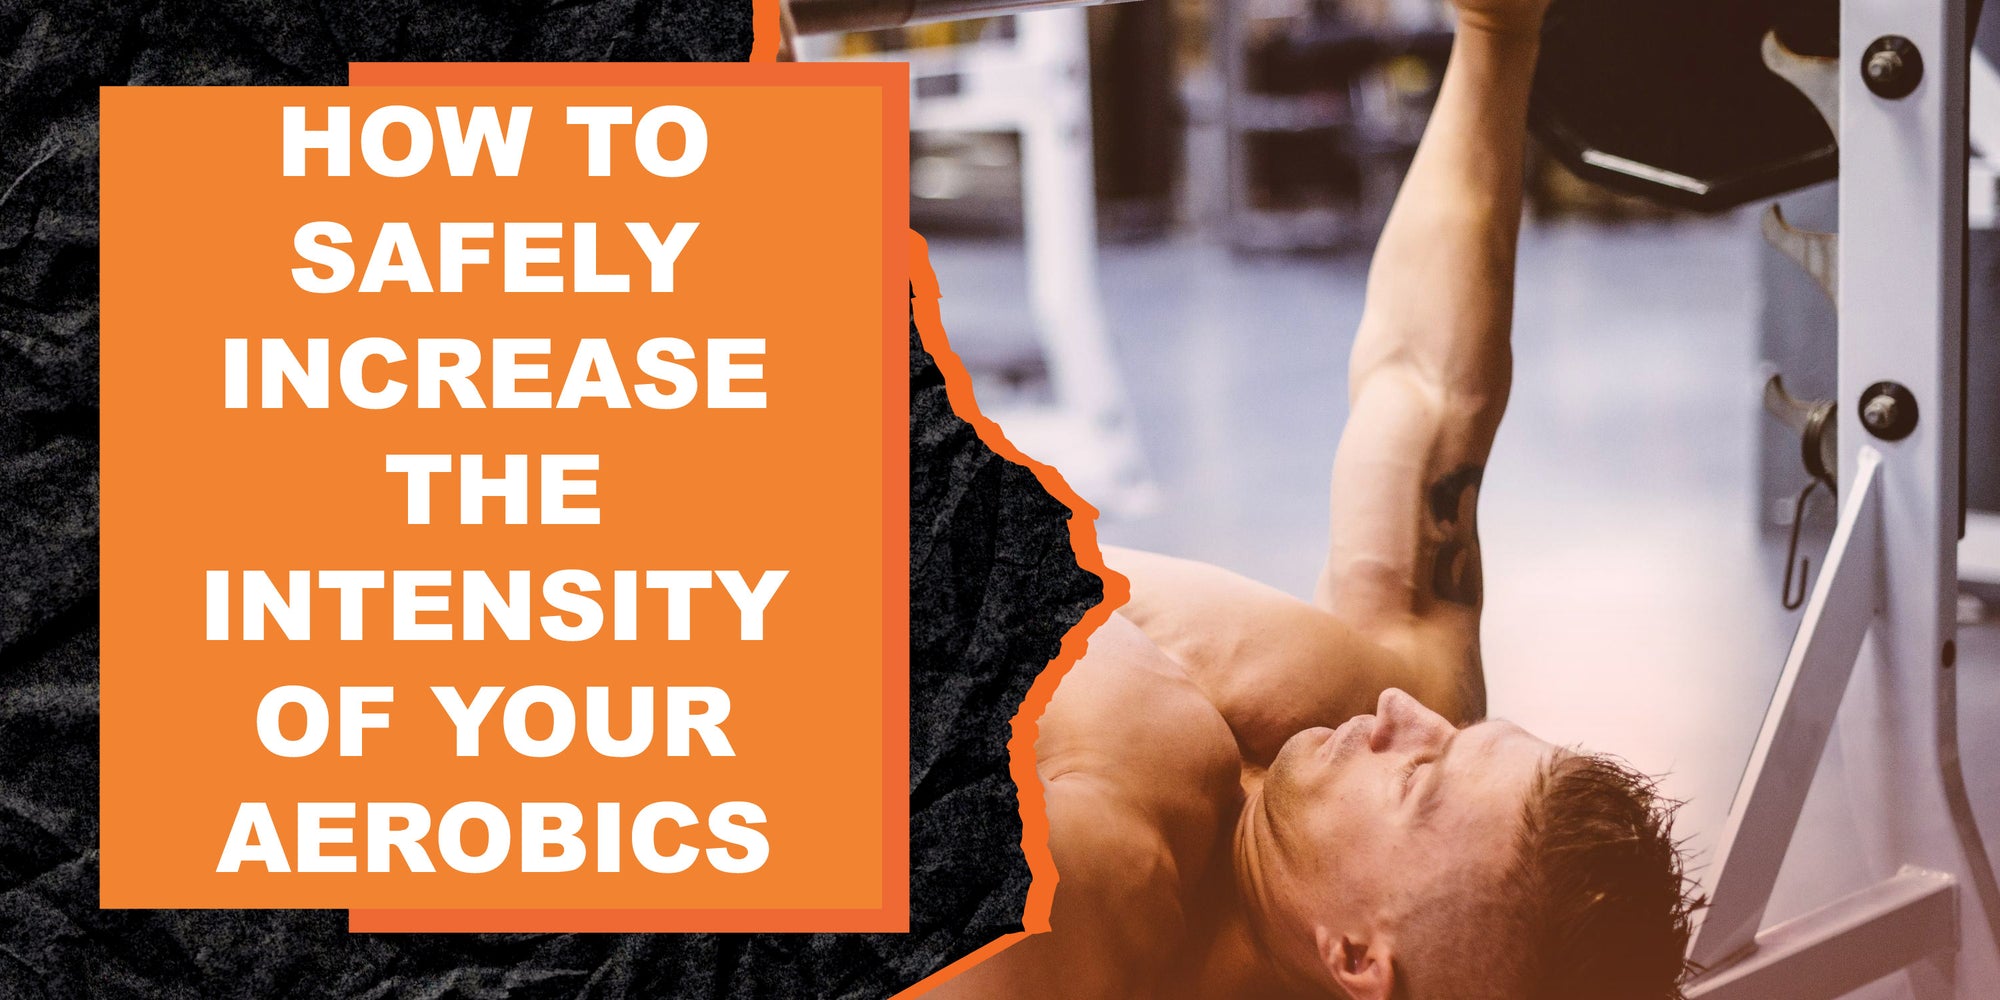 How to Safely Increase the Intensity of Your Aerobics Workouts